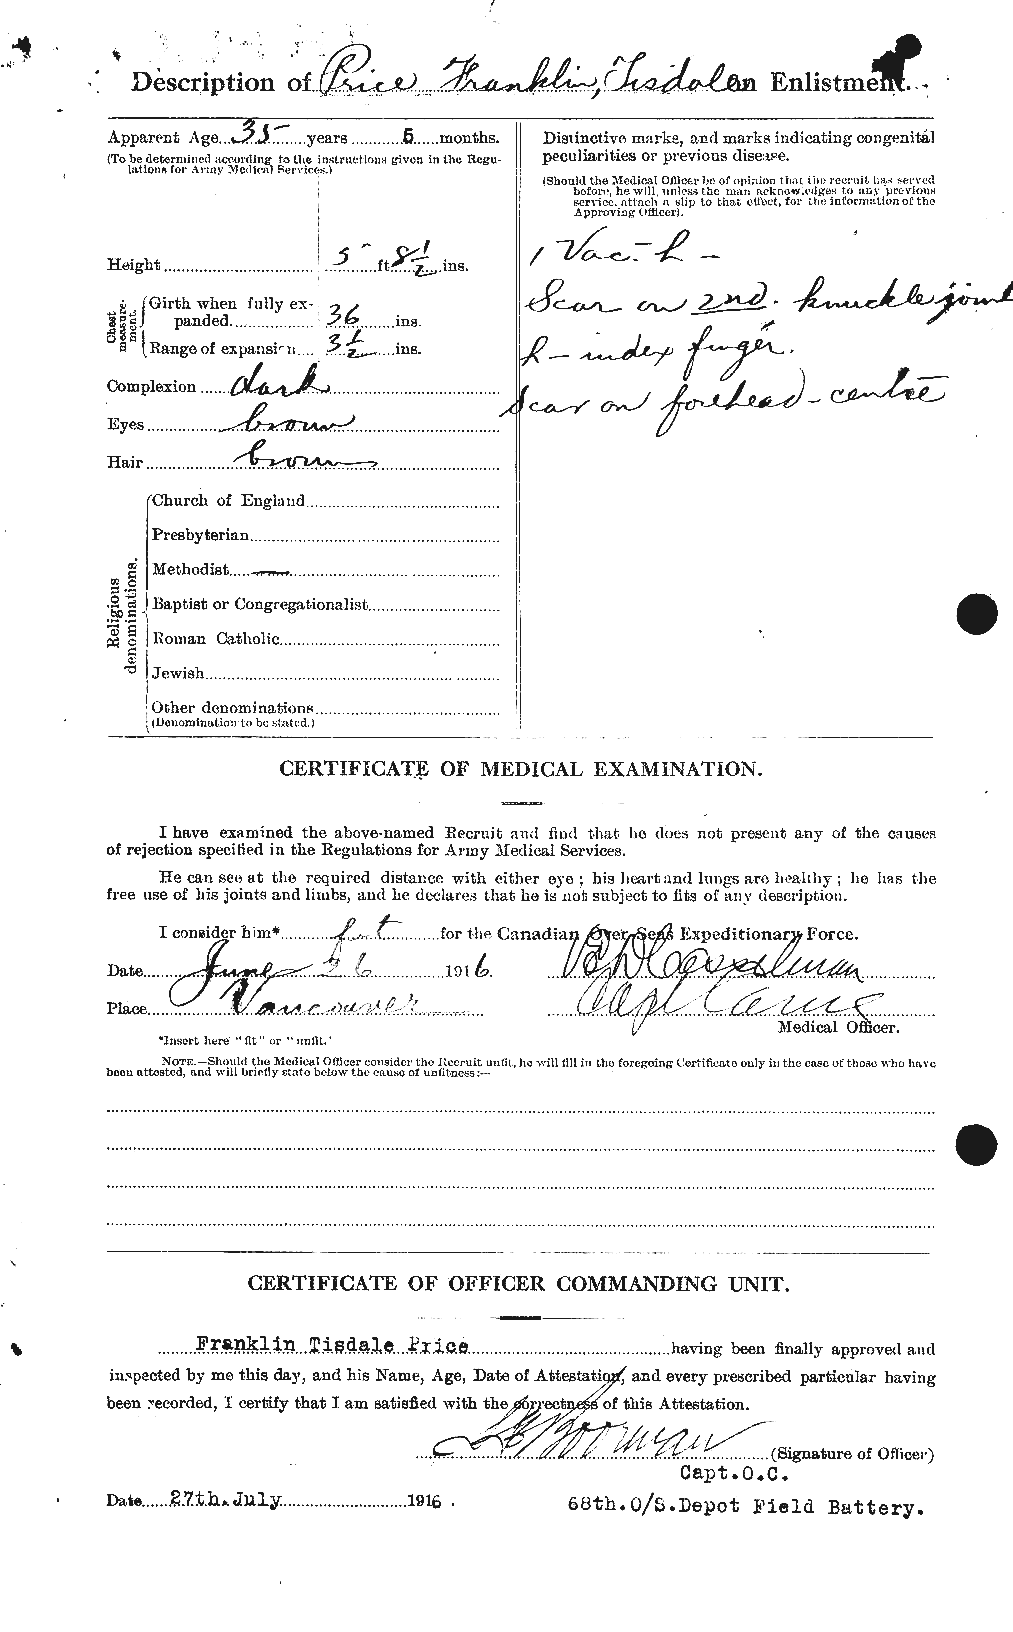 Personnel Records of the First World War - CEF 587061b